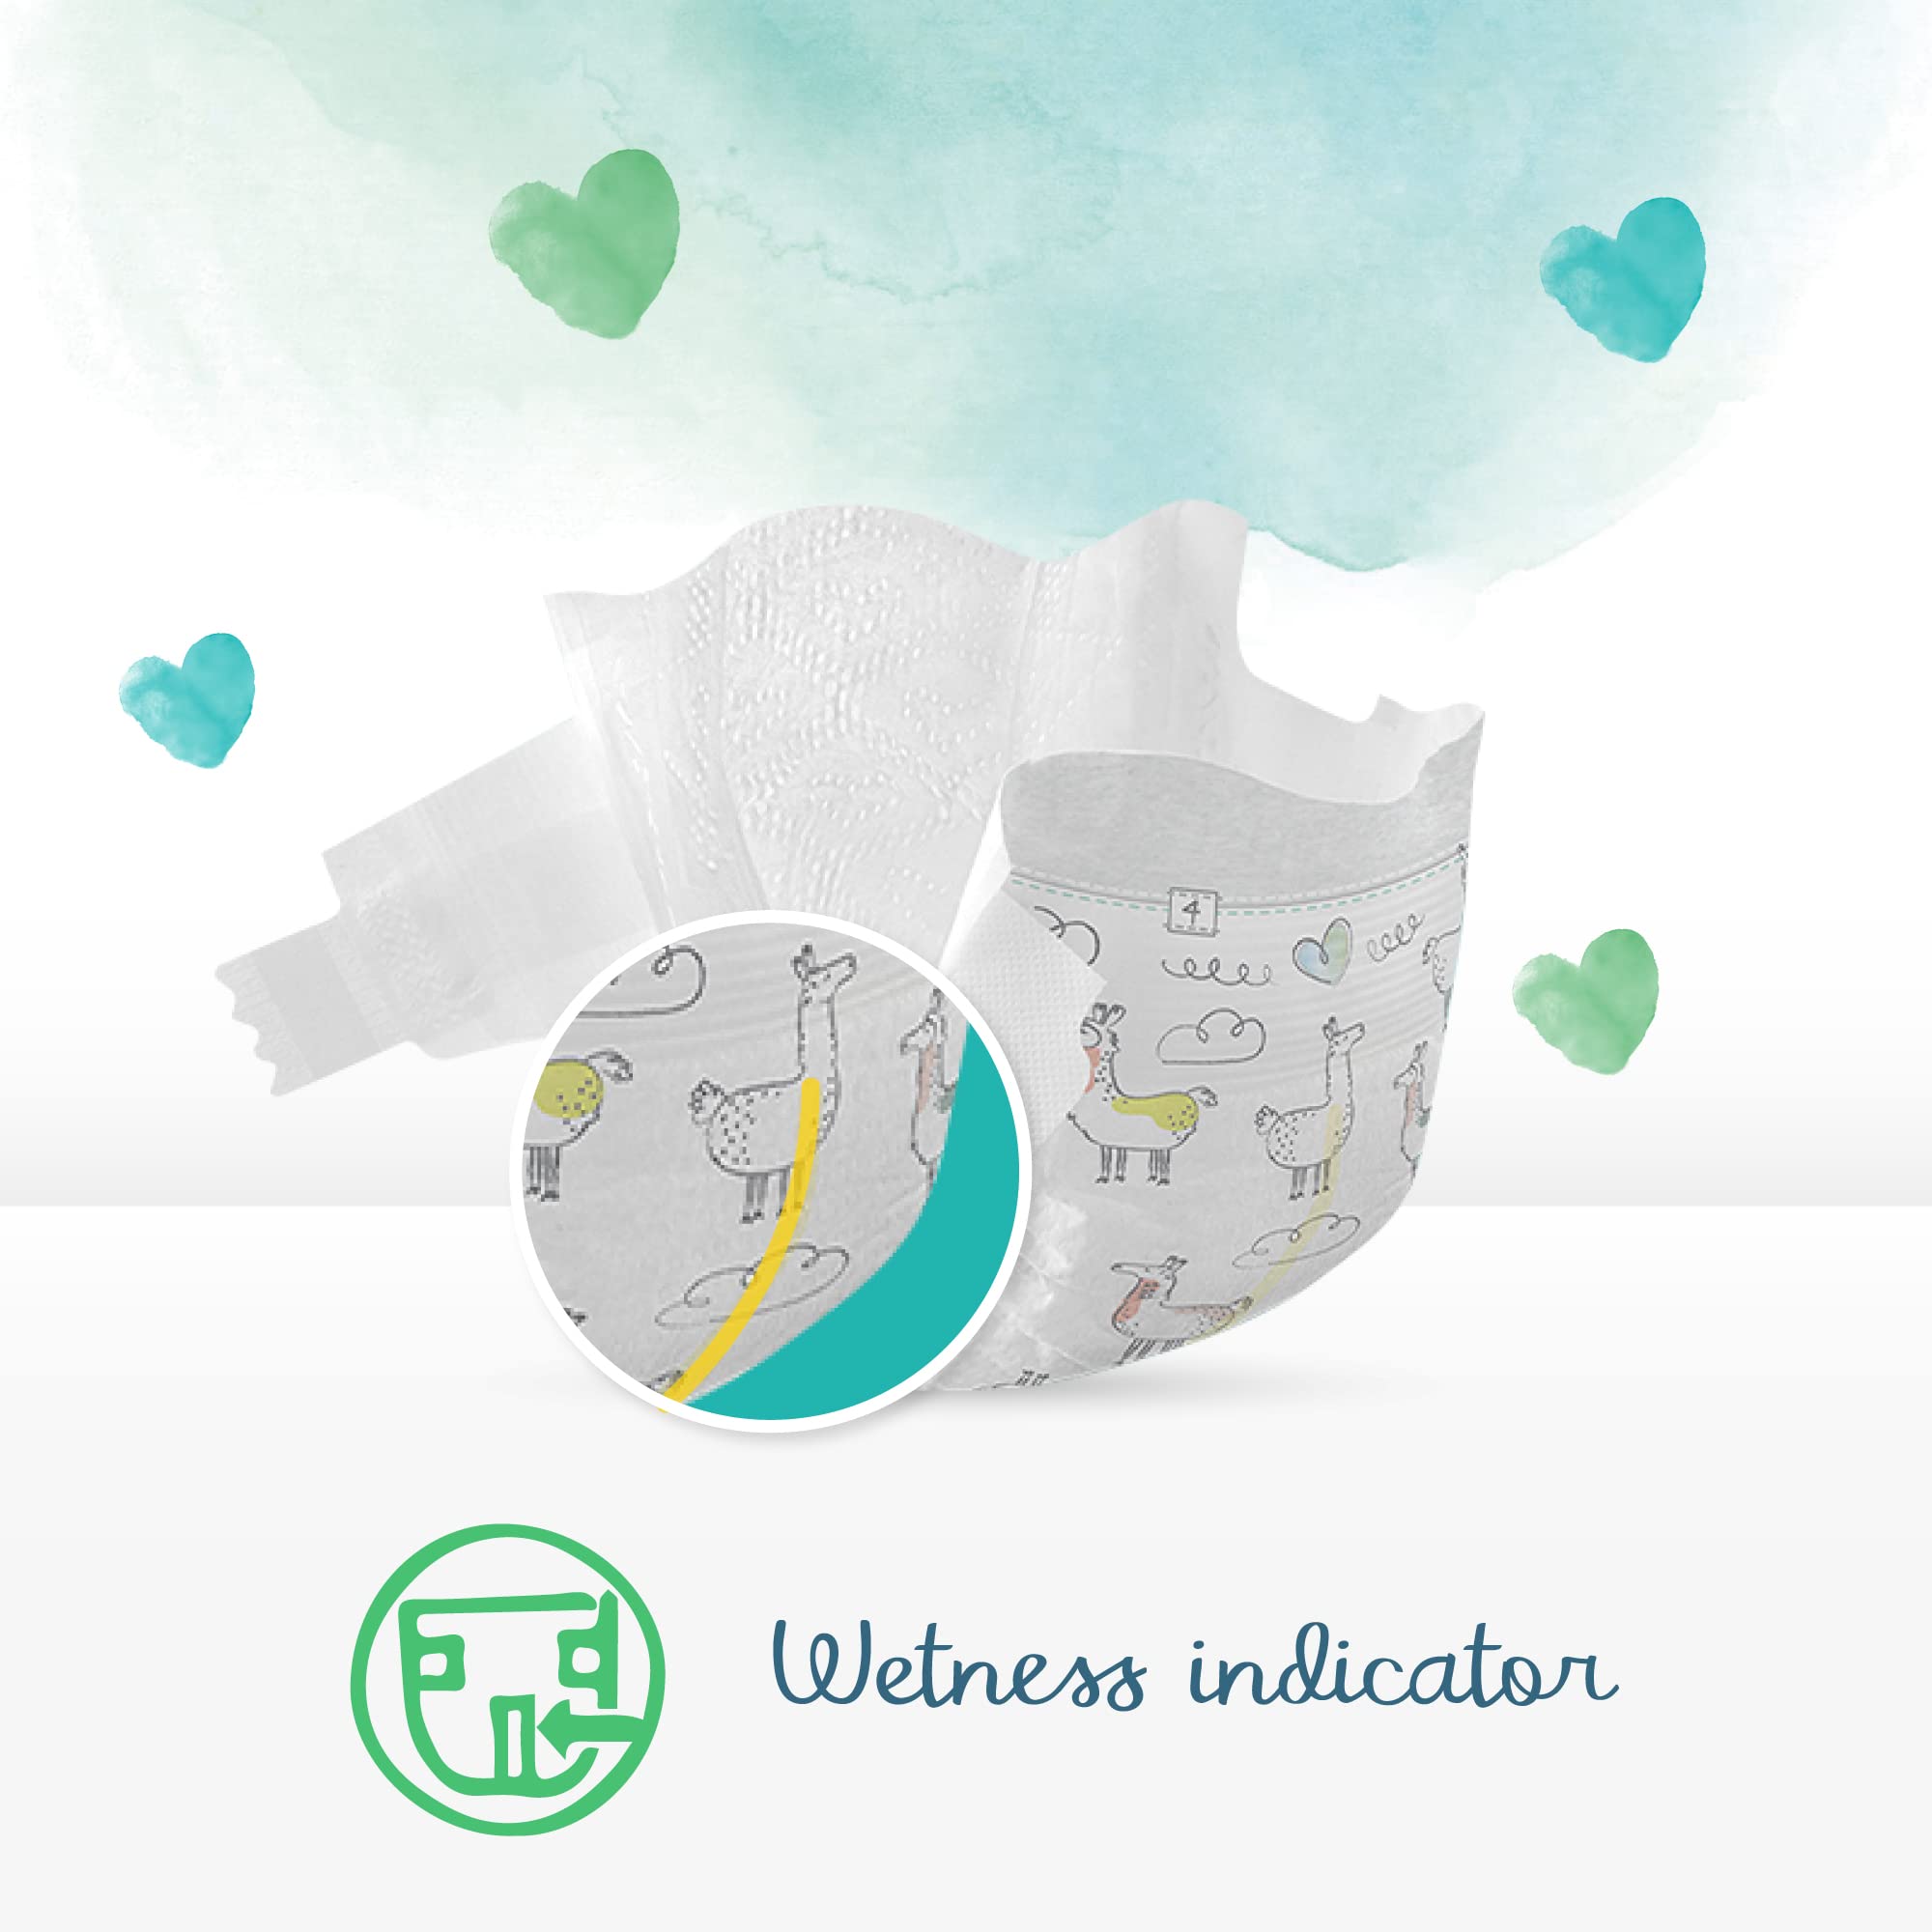 Pampers Pure Protection Dermatologically Tested Diapers, Size 2, 4-8Kg, 78 Diaper Count, Pack Of 2 Pieces بامبرز حفاضات بيور بروتكشن تم اختبارها من قبل اطباء الجلدية، مقاس 2، 4-8 كغم، 78 حفاضة، عبوة من قطعتين